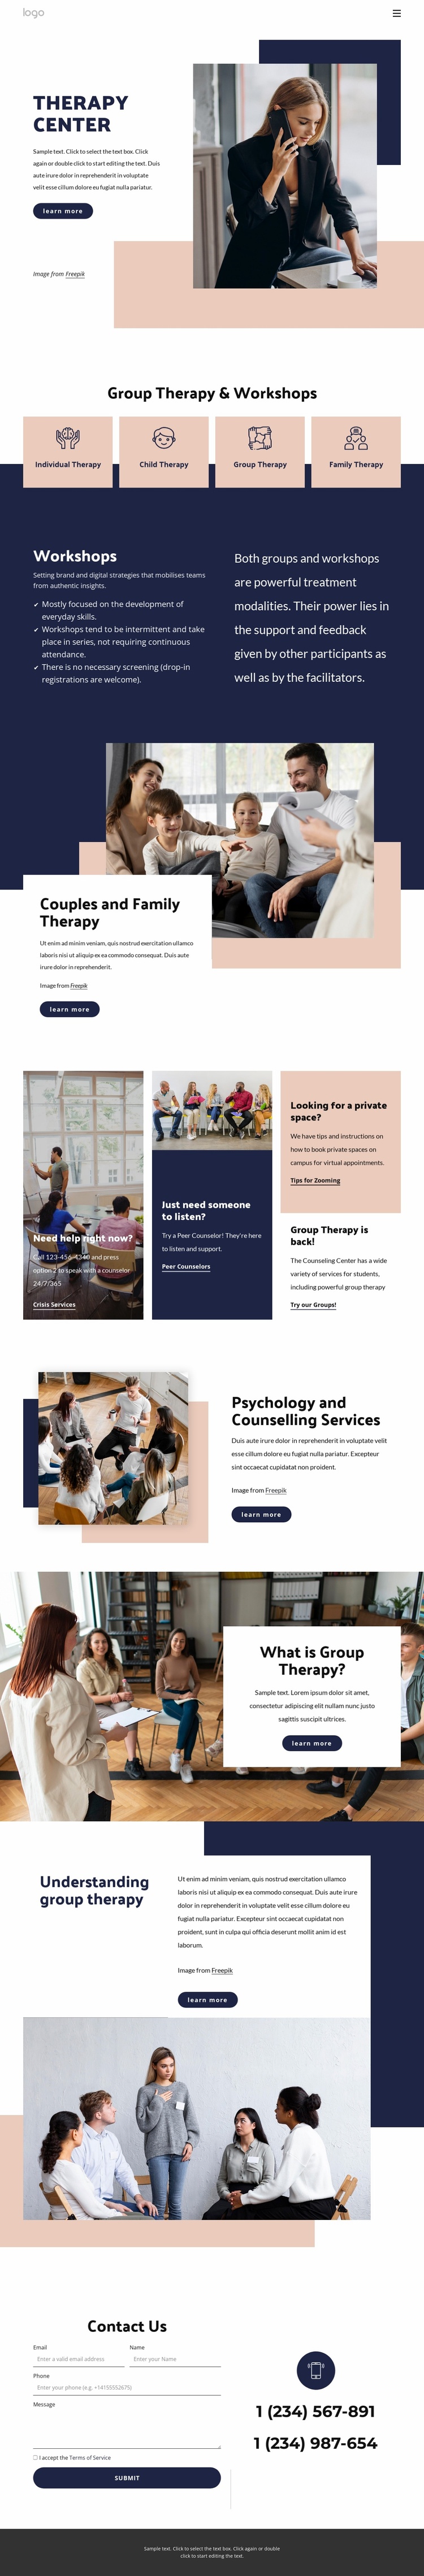 Therapy center Website Template